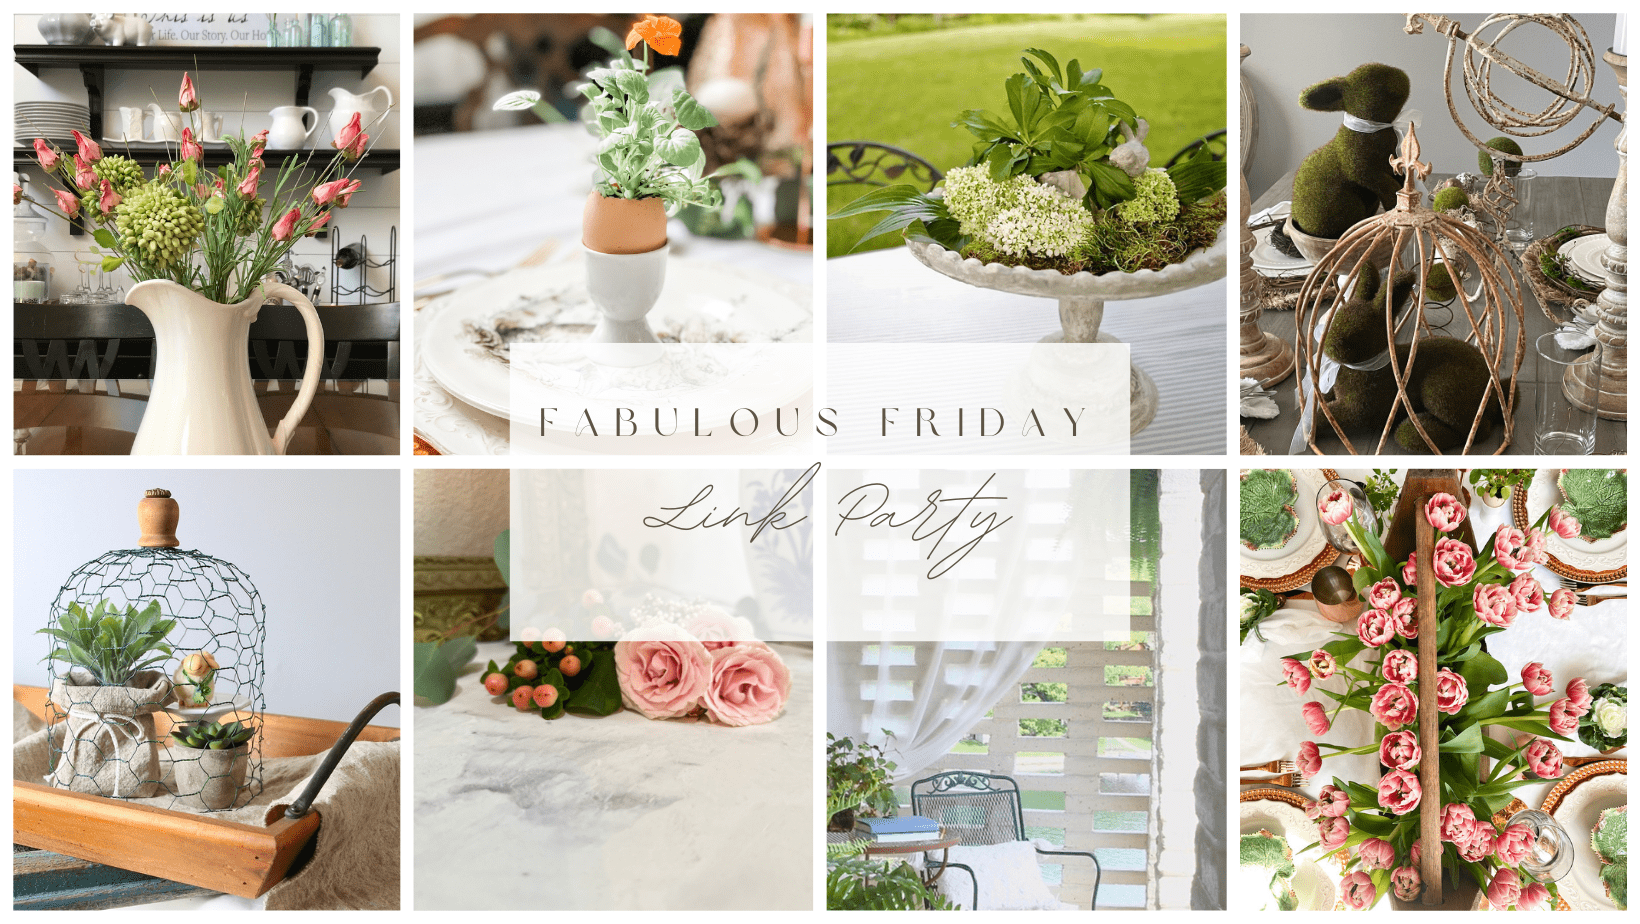 Fabulous Friday Link Party 04.06.23